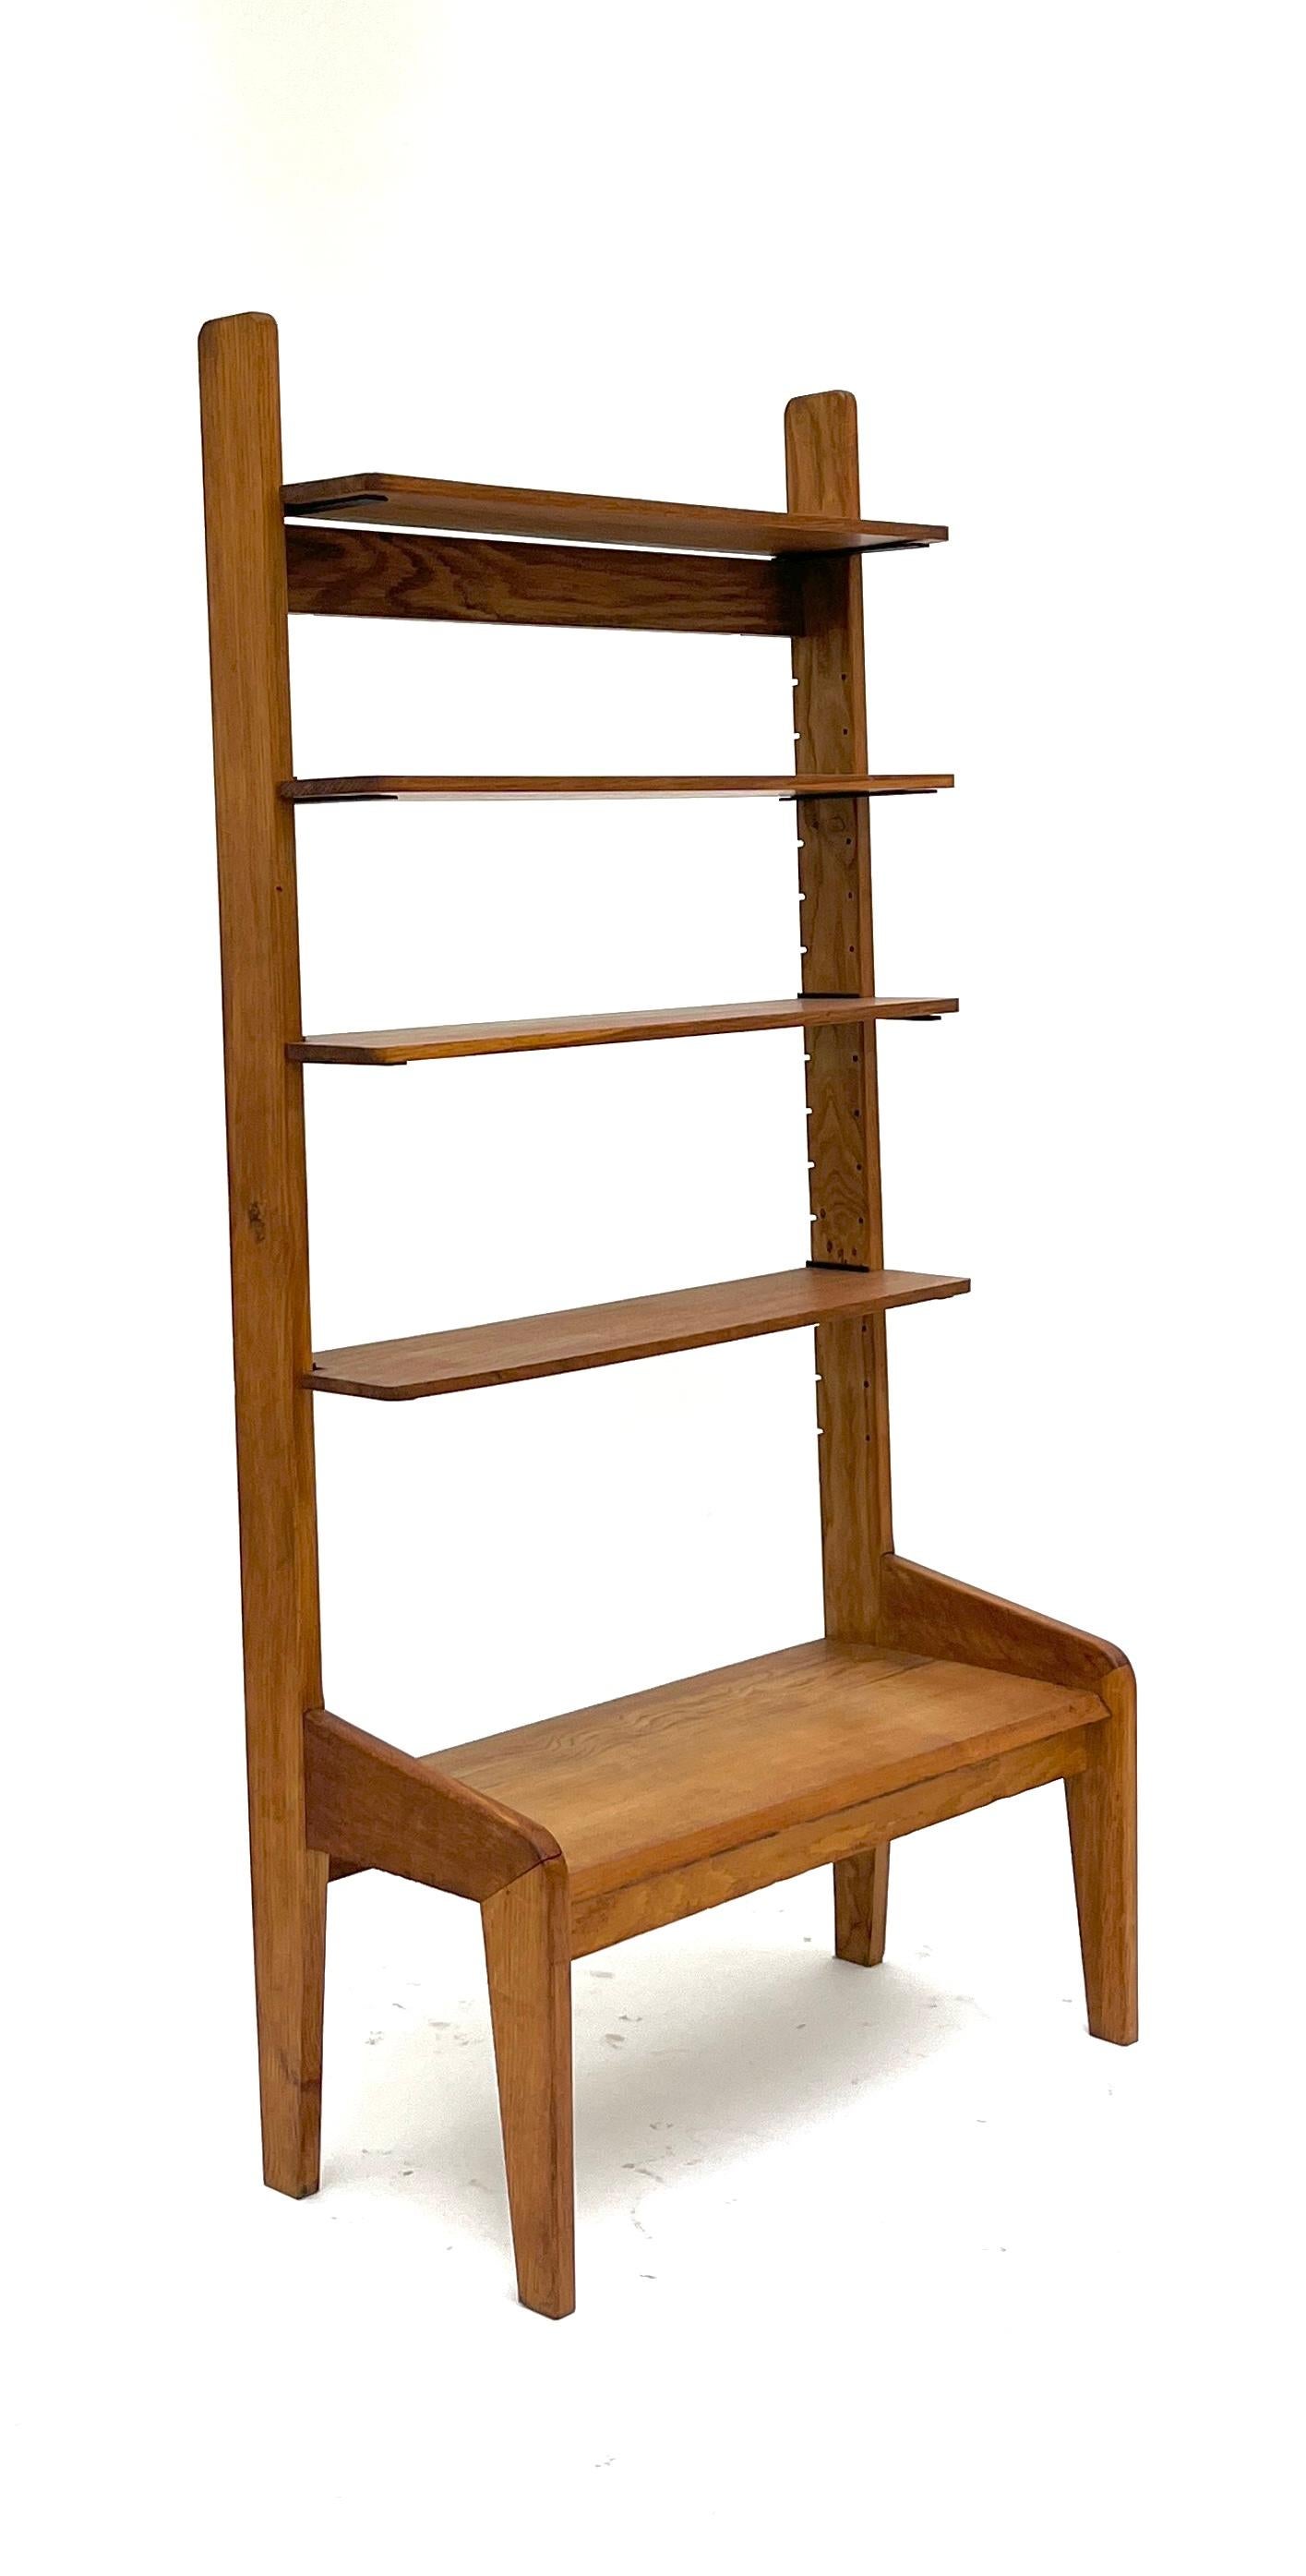 Inclined Shelf in Oak by René Jean Caillette, 1950

Light oak, sloping design and very good state of preservation.

René-Jean Caillette (1919 - 2005) studied at the Ecole Supérieure des Arts Appliqués from which he graduated first in his class. He